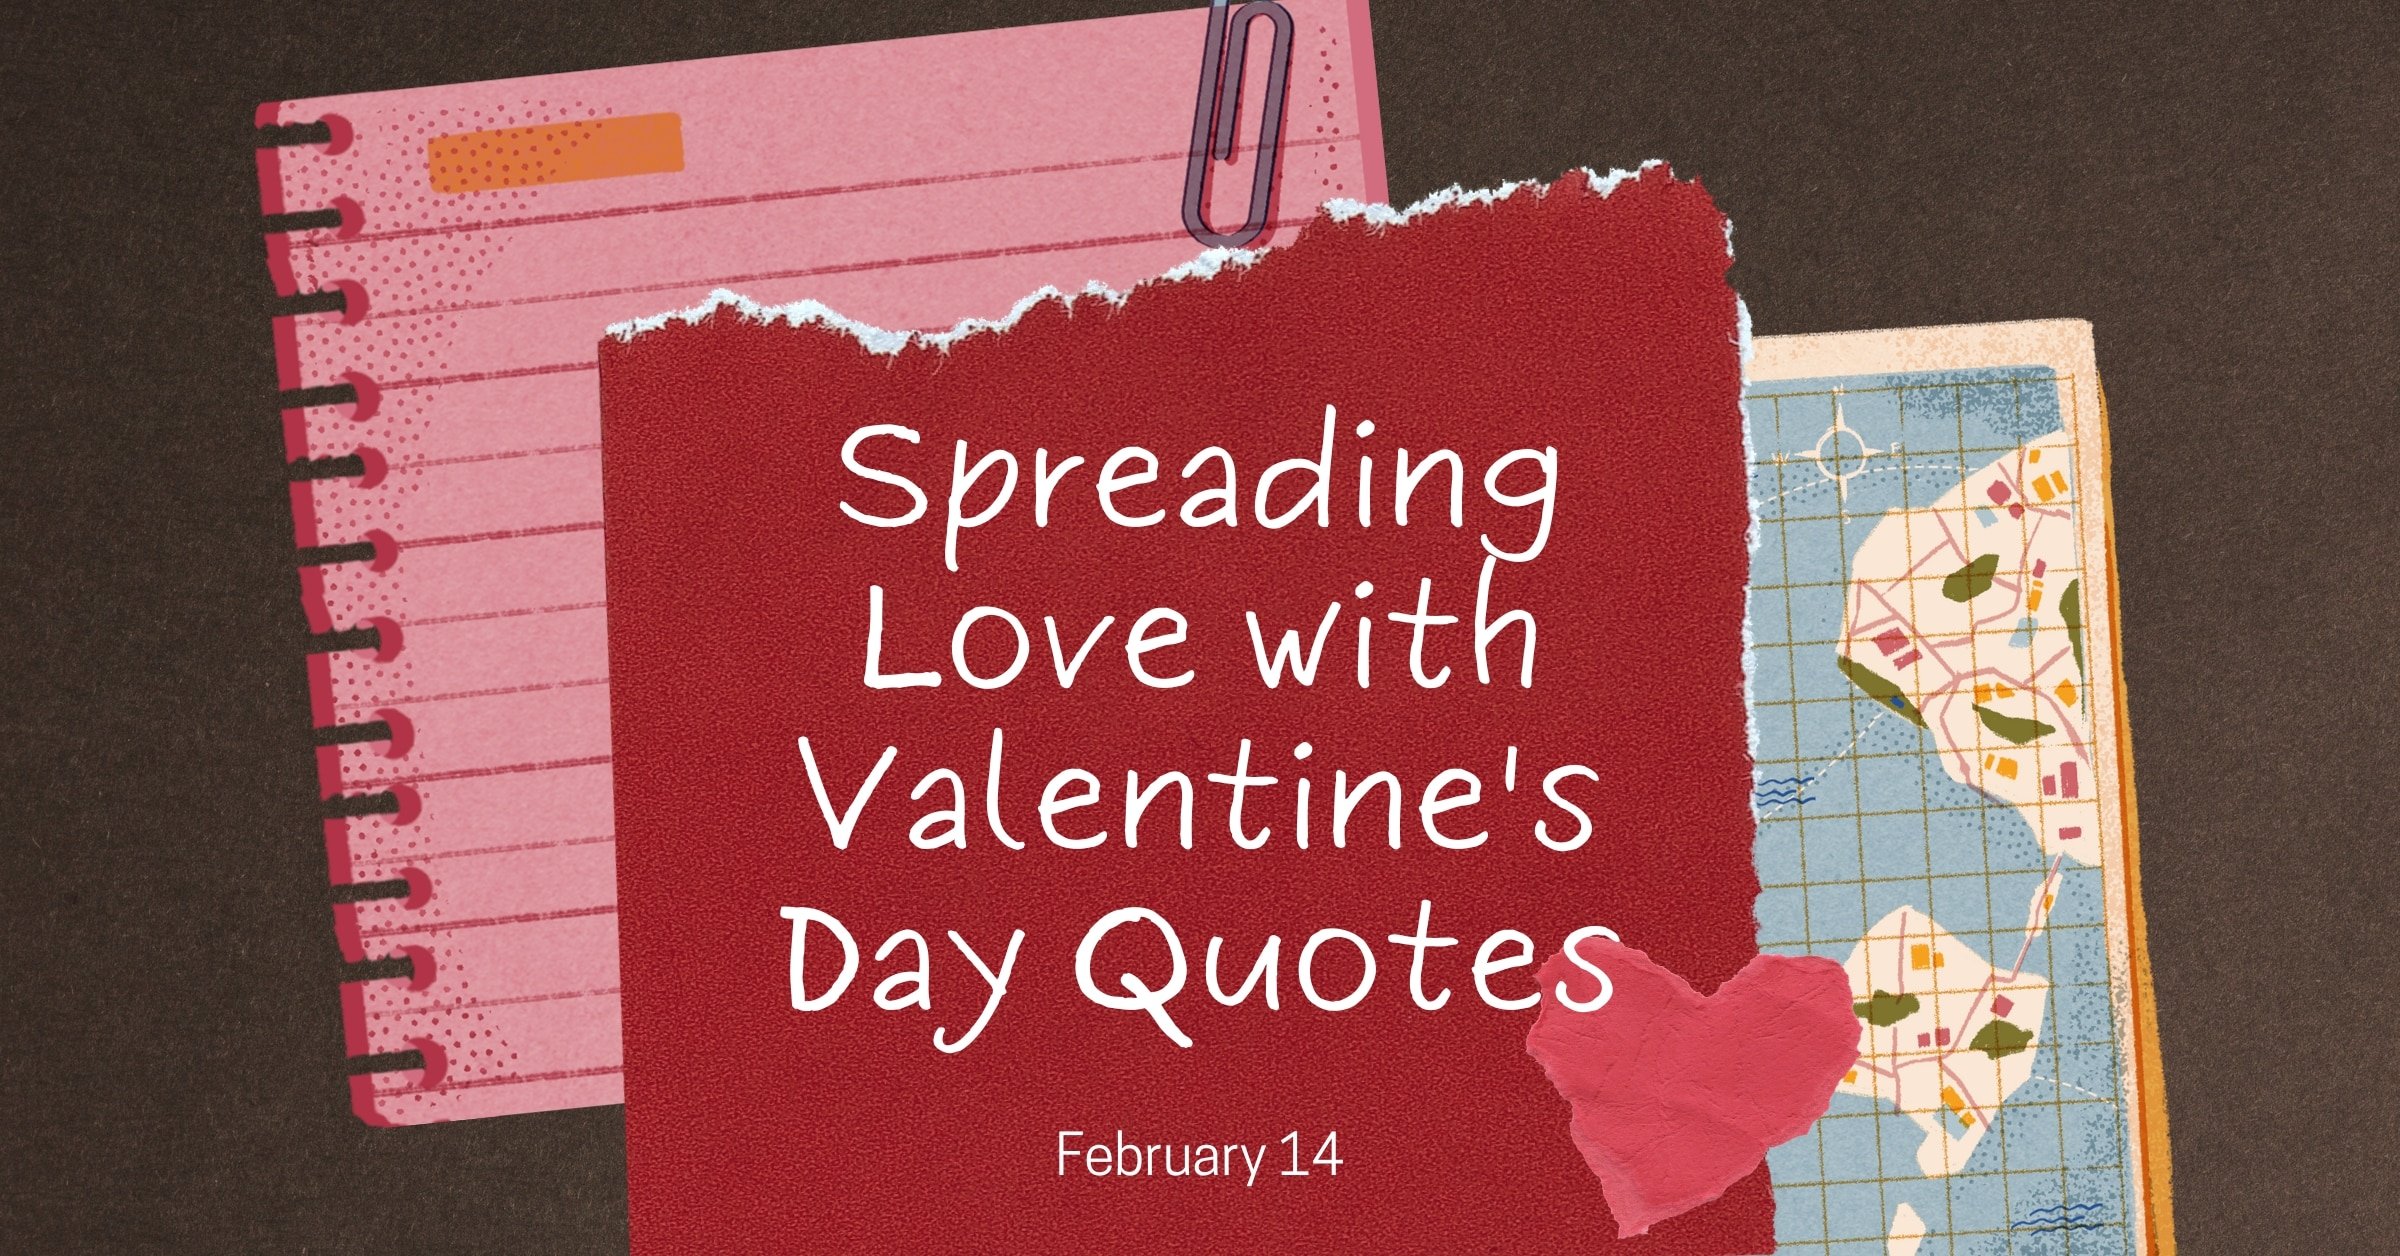 Heartwarming Valentine'S Day Quotes To Share With Your Loved Ones And Strengthen Your Relationship